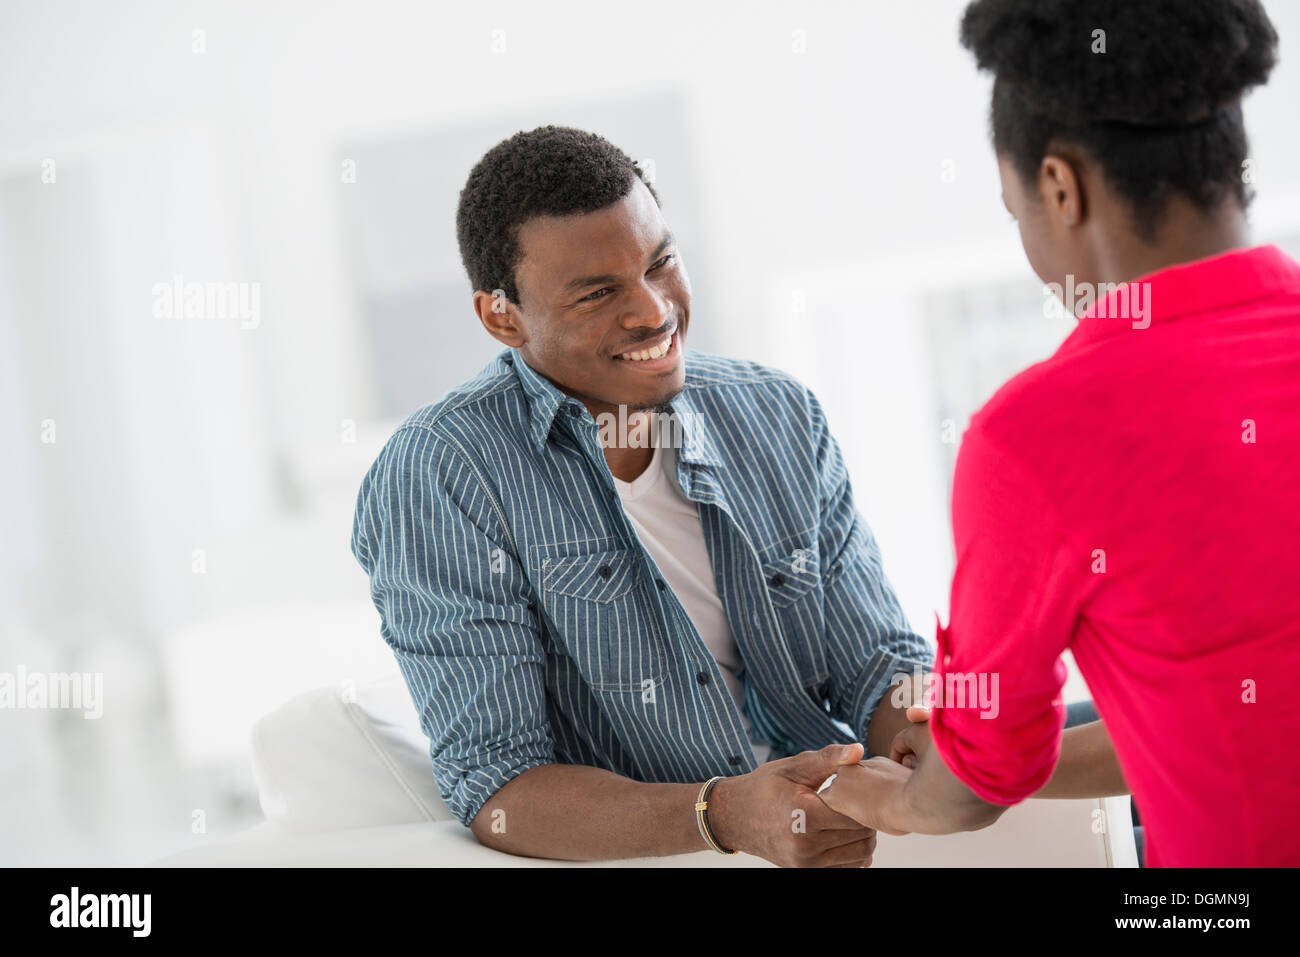 Office interior. Two people talking to each other, face to face. Stock Photo